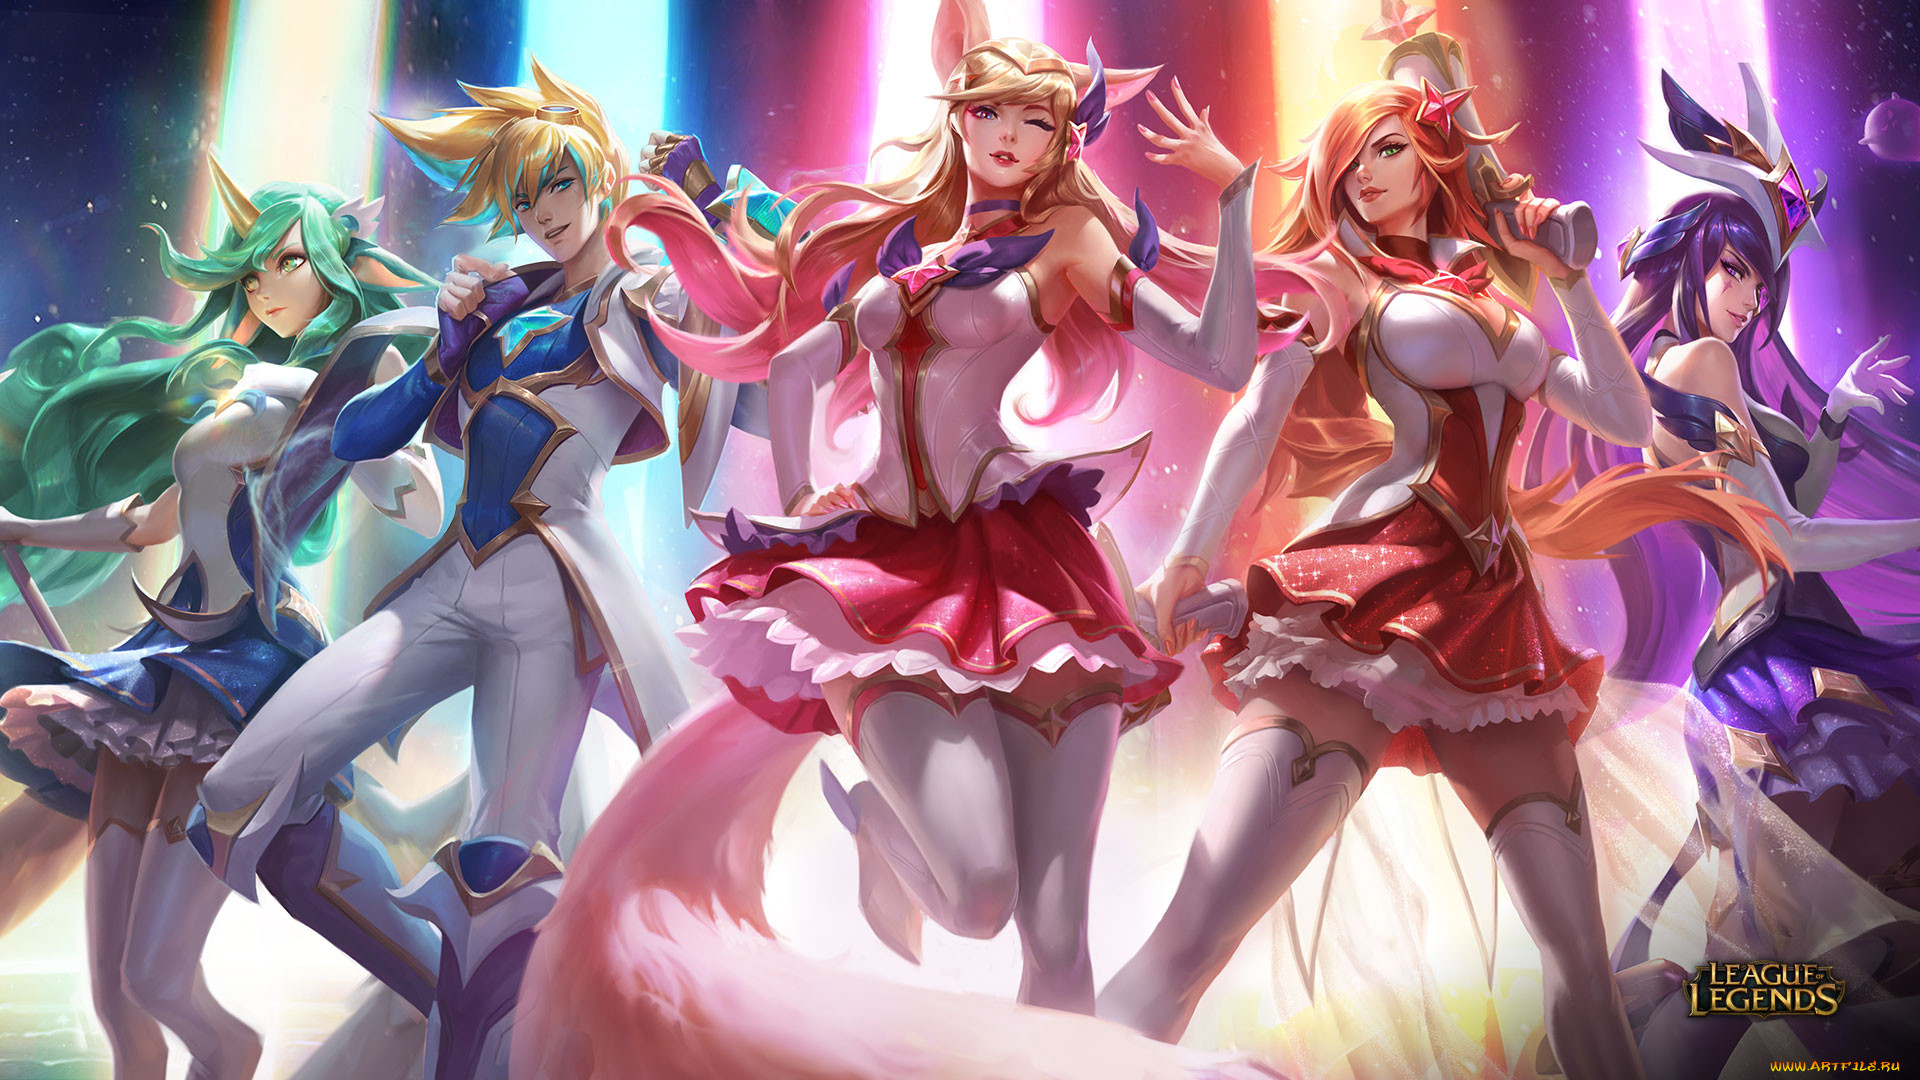  , league of legends, justice, league, sona, ahri, syndra, miss fortune, ezreal